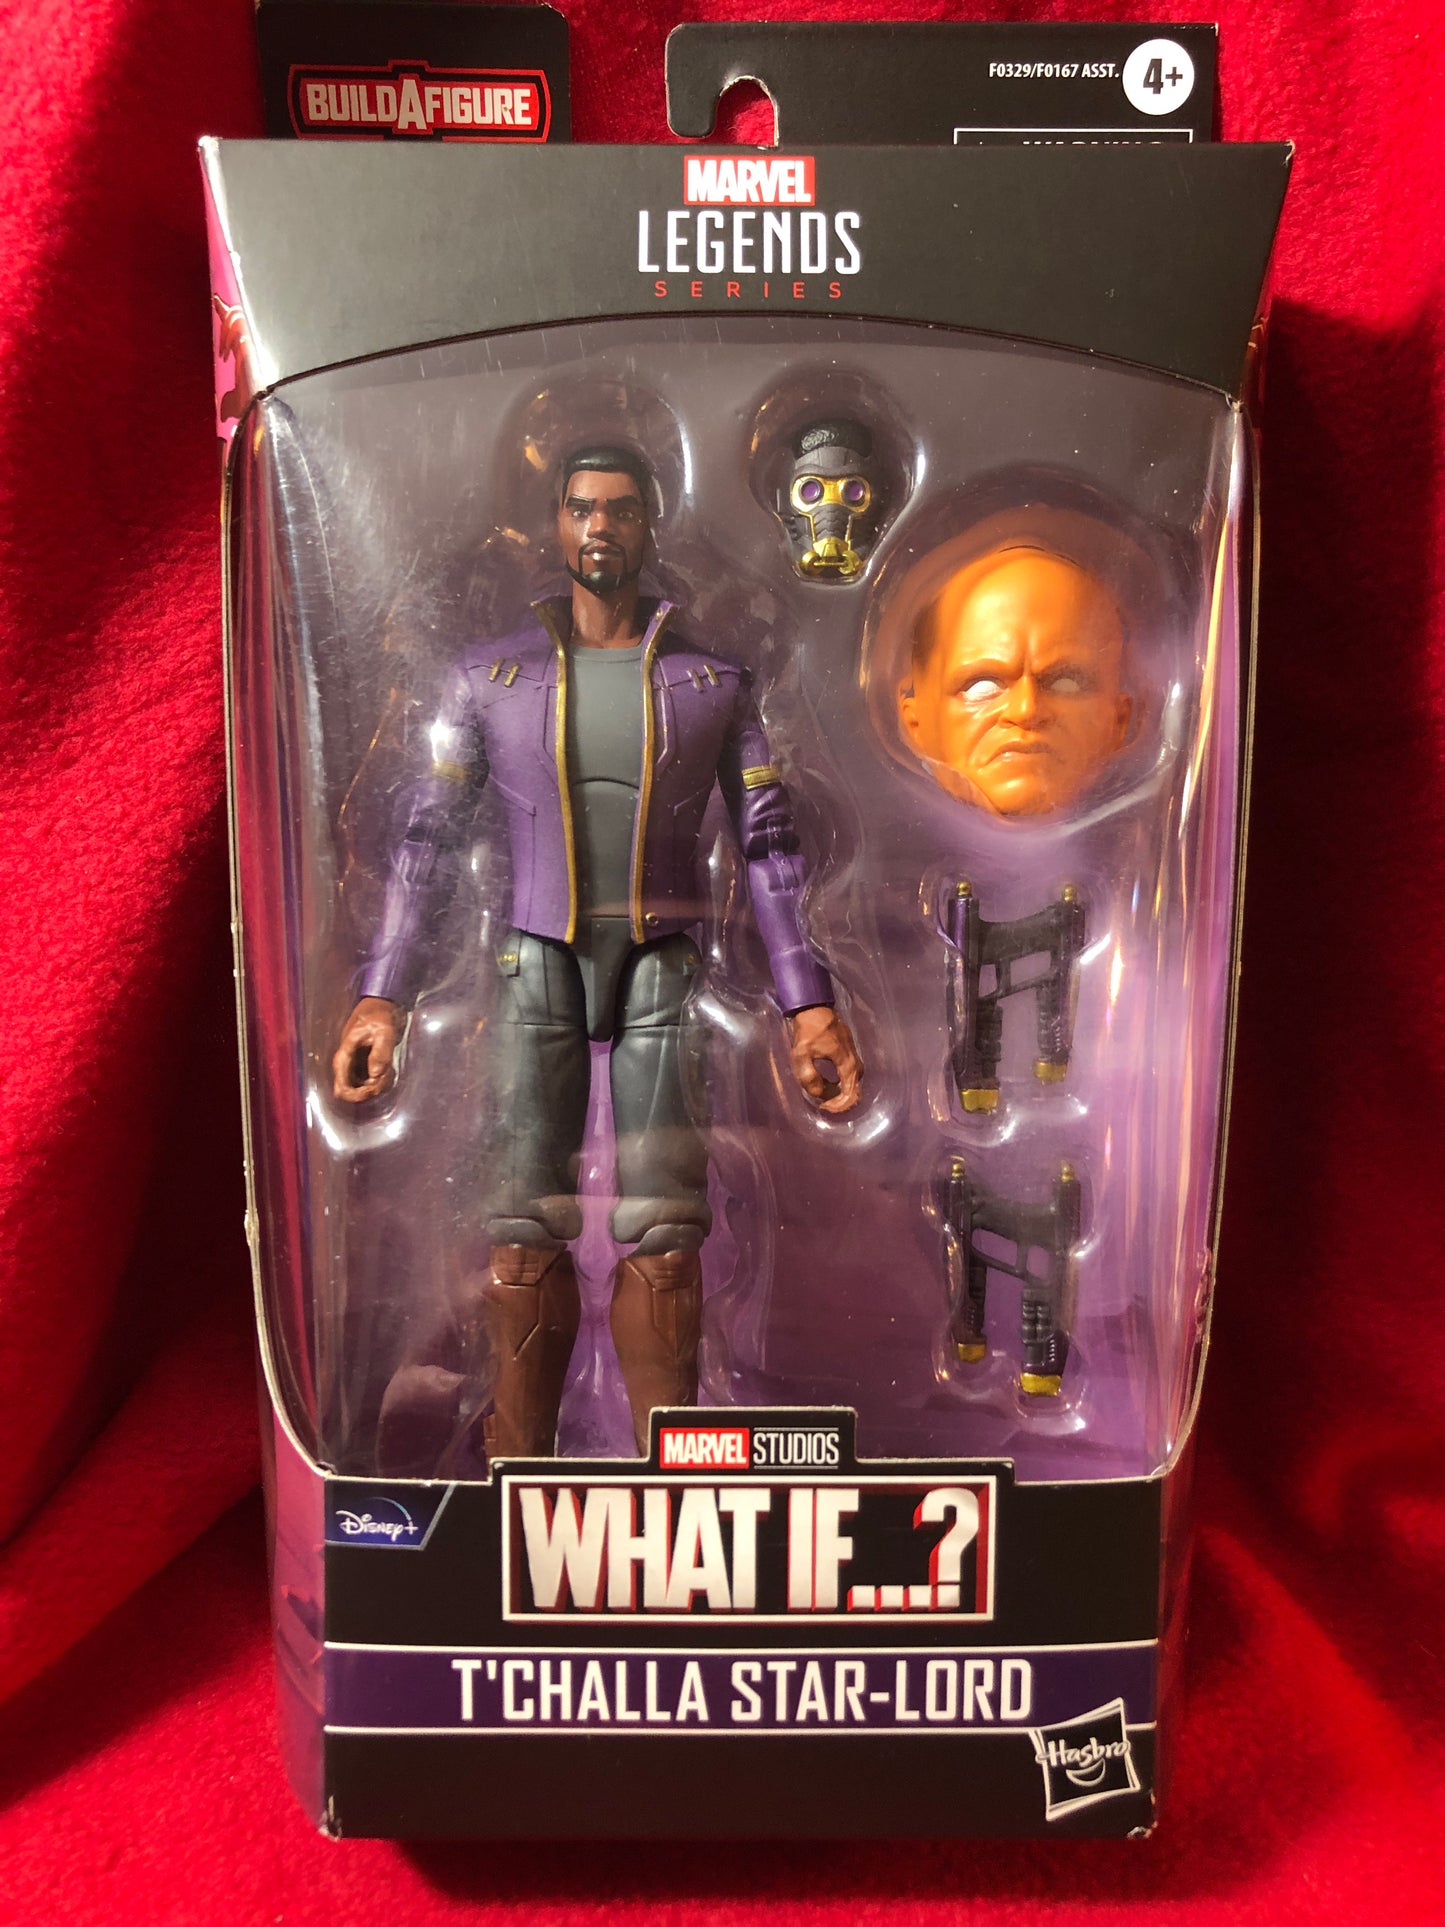 MARVEL LEGENDS - Série "What If...?" - BAF THE WATCHER - Figurine de T'CHALLA STAR-LORD